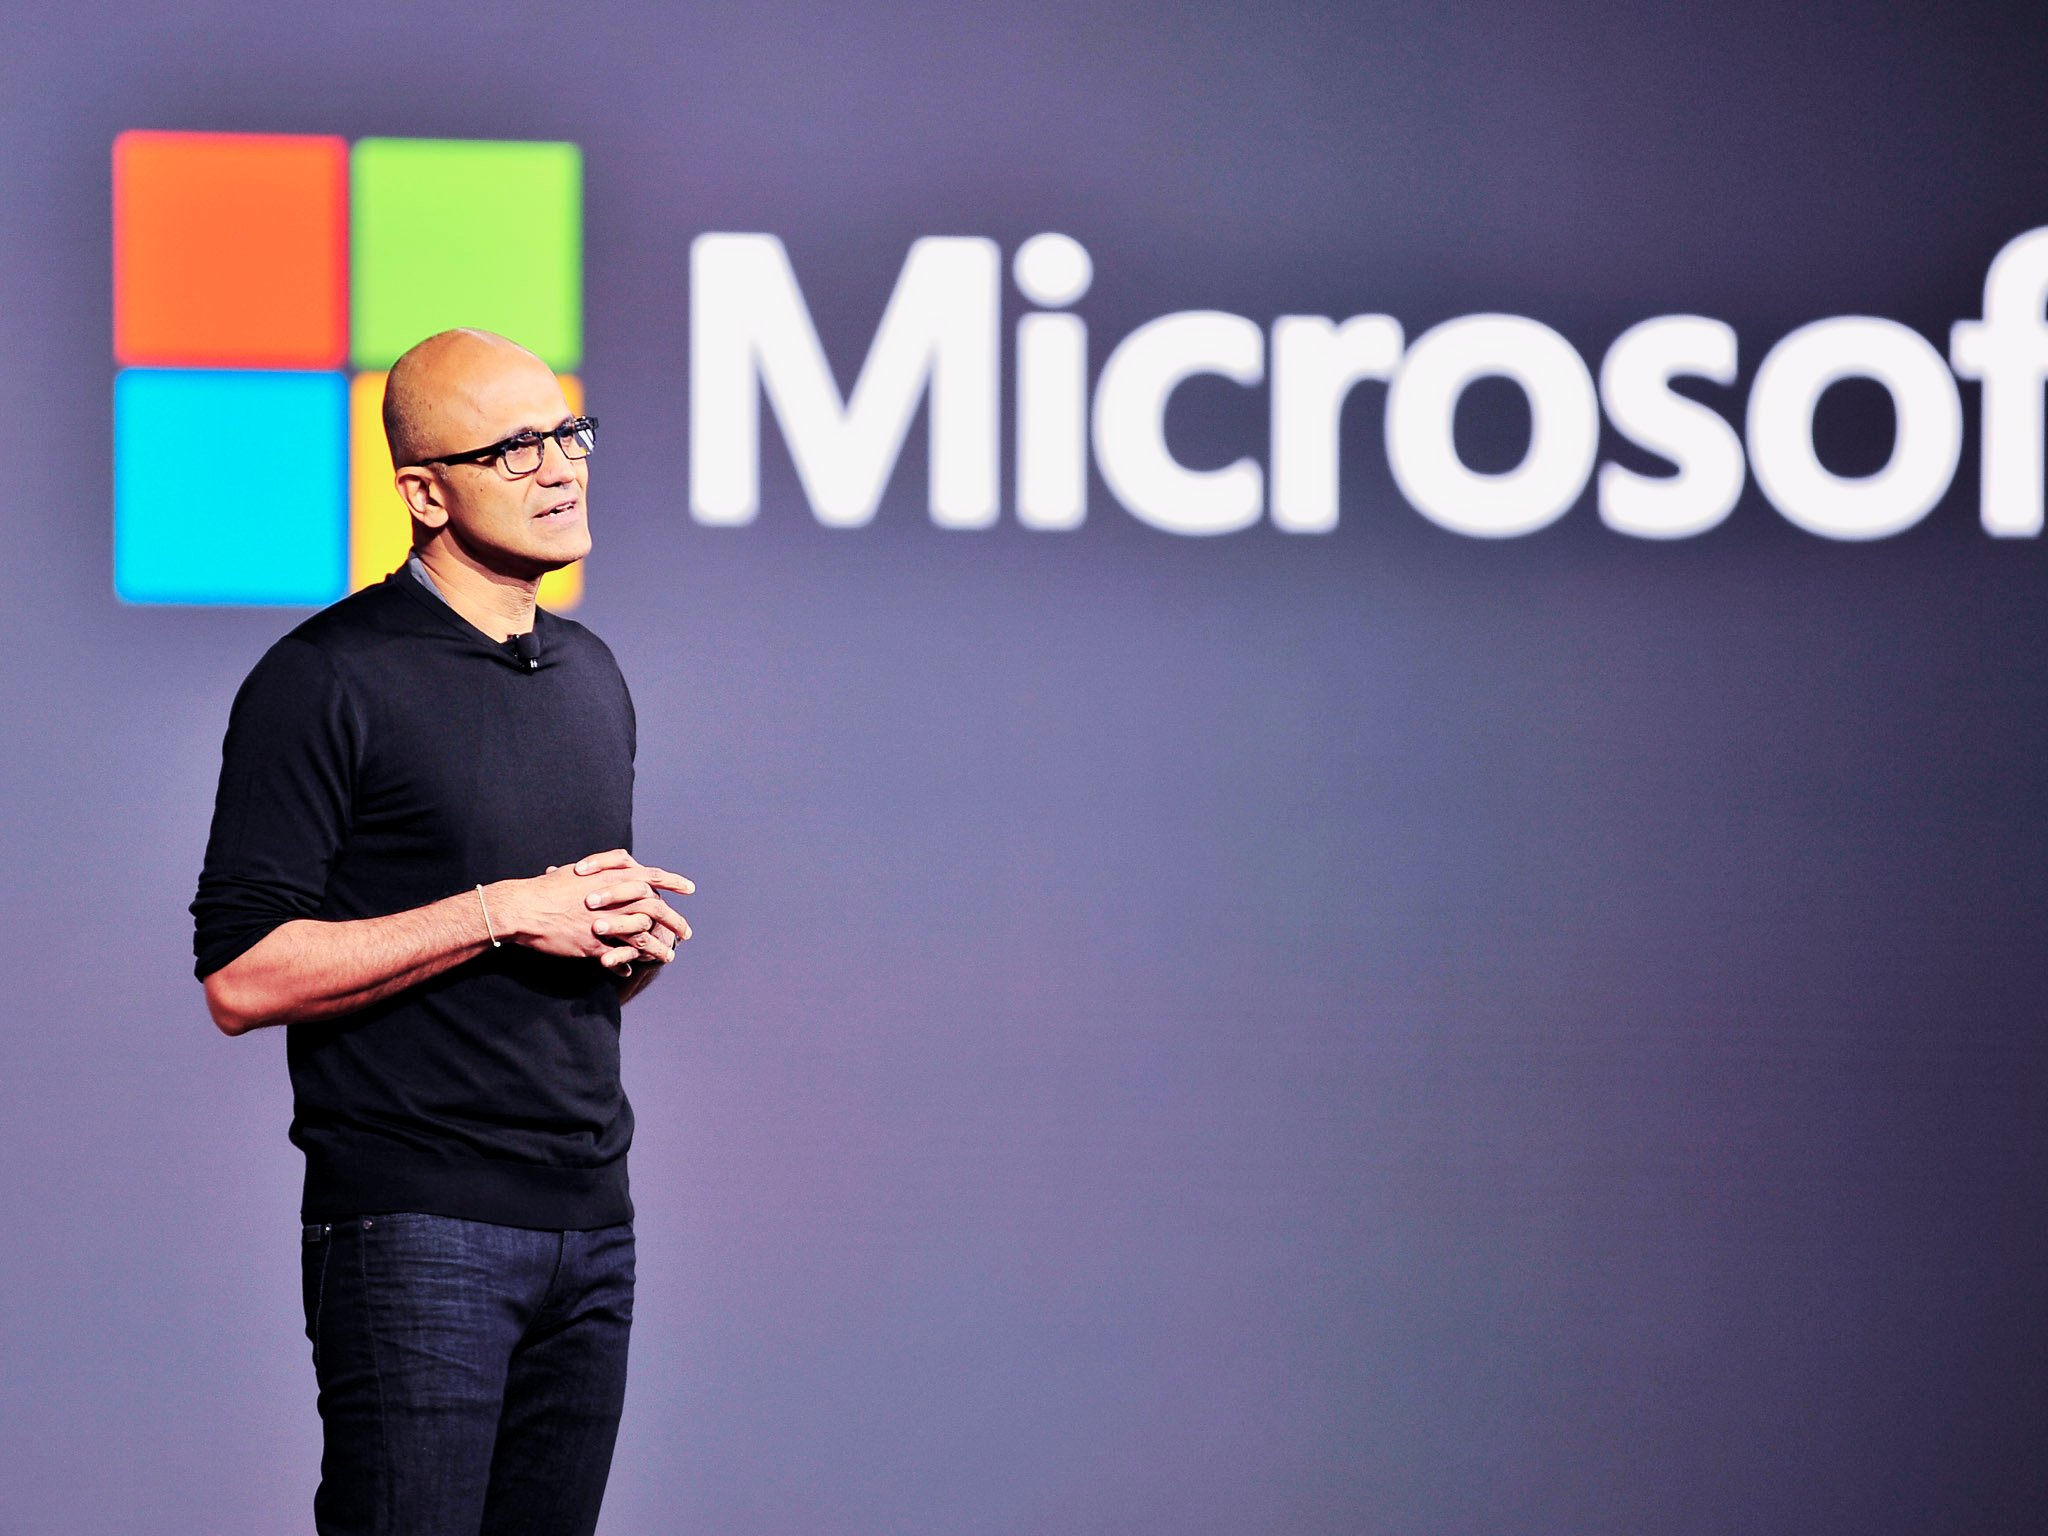 Microsoft stock price crosses the 00 mark for first time